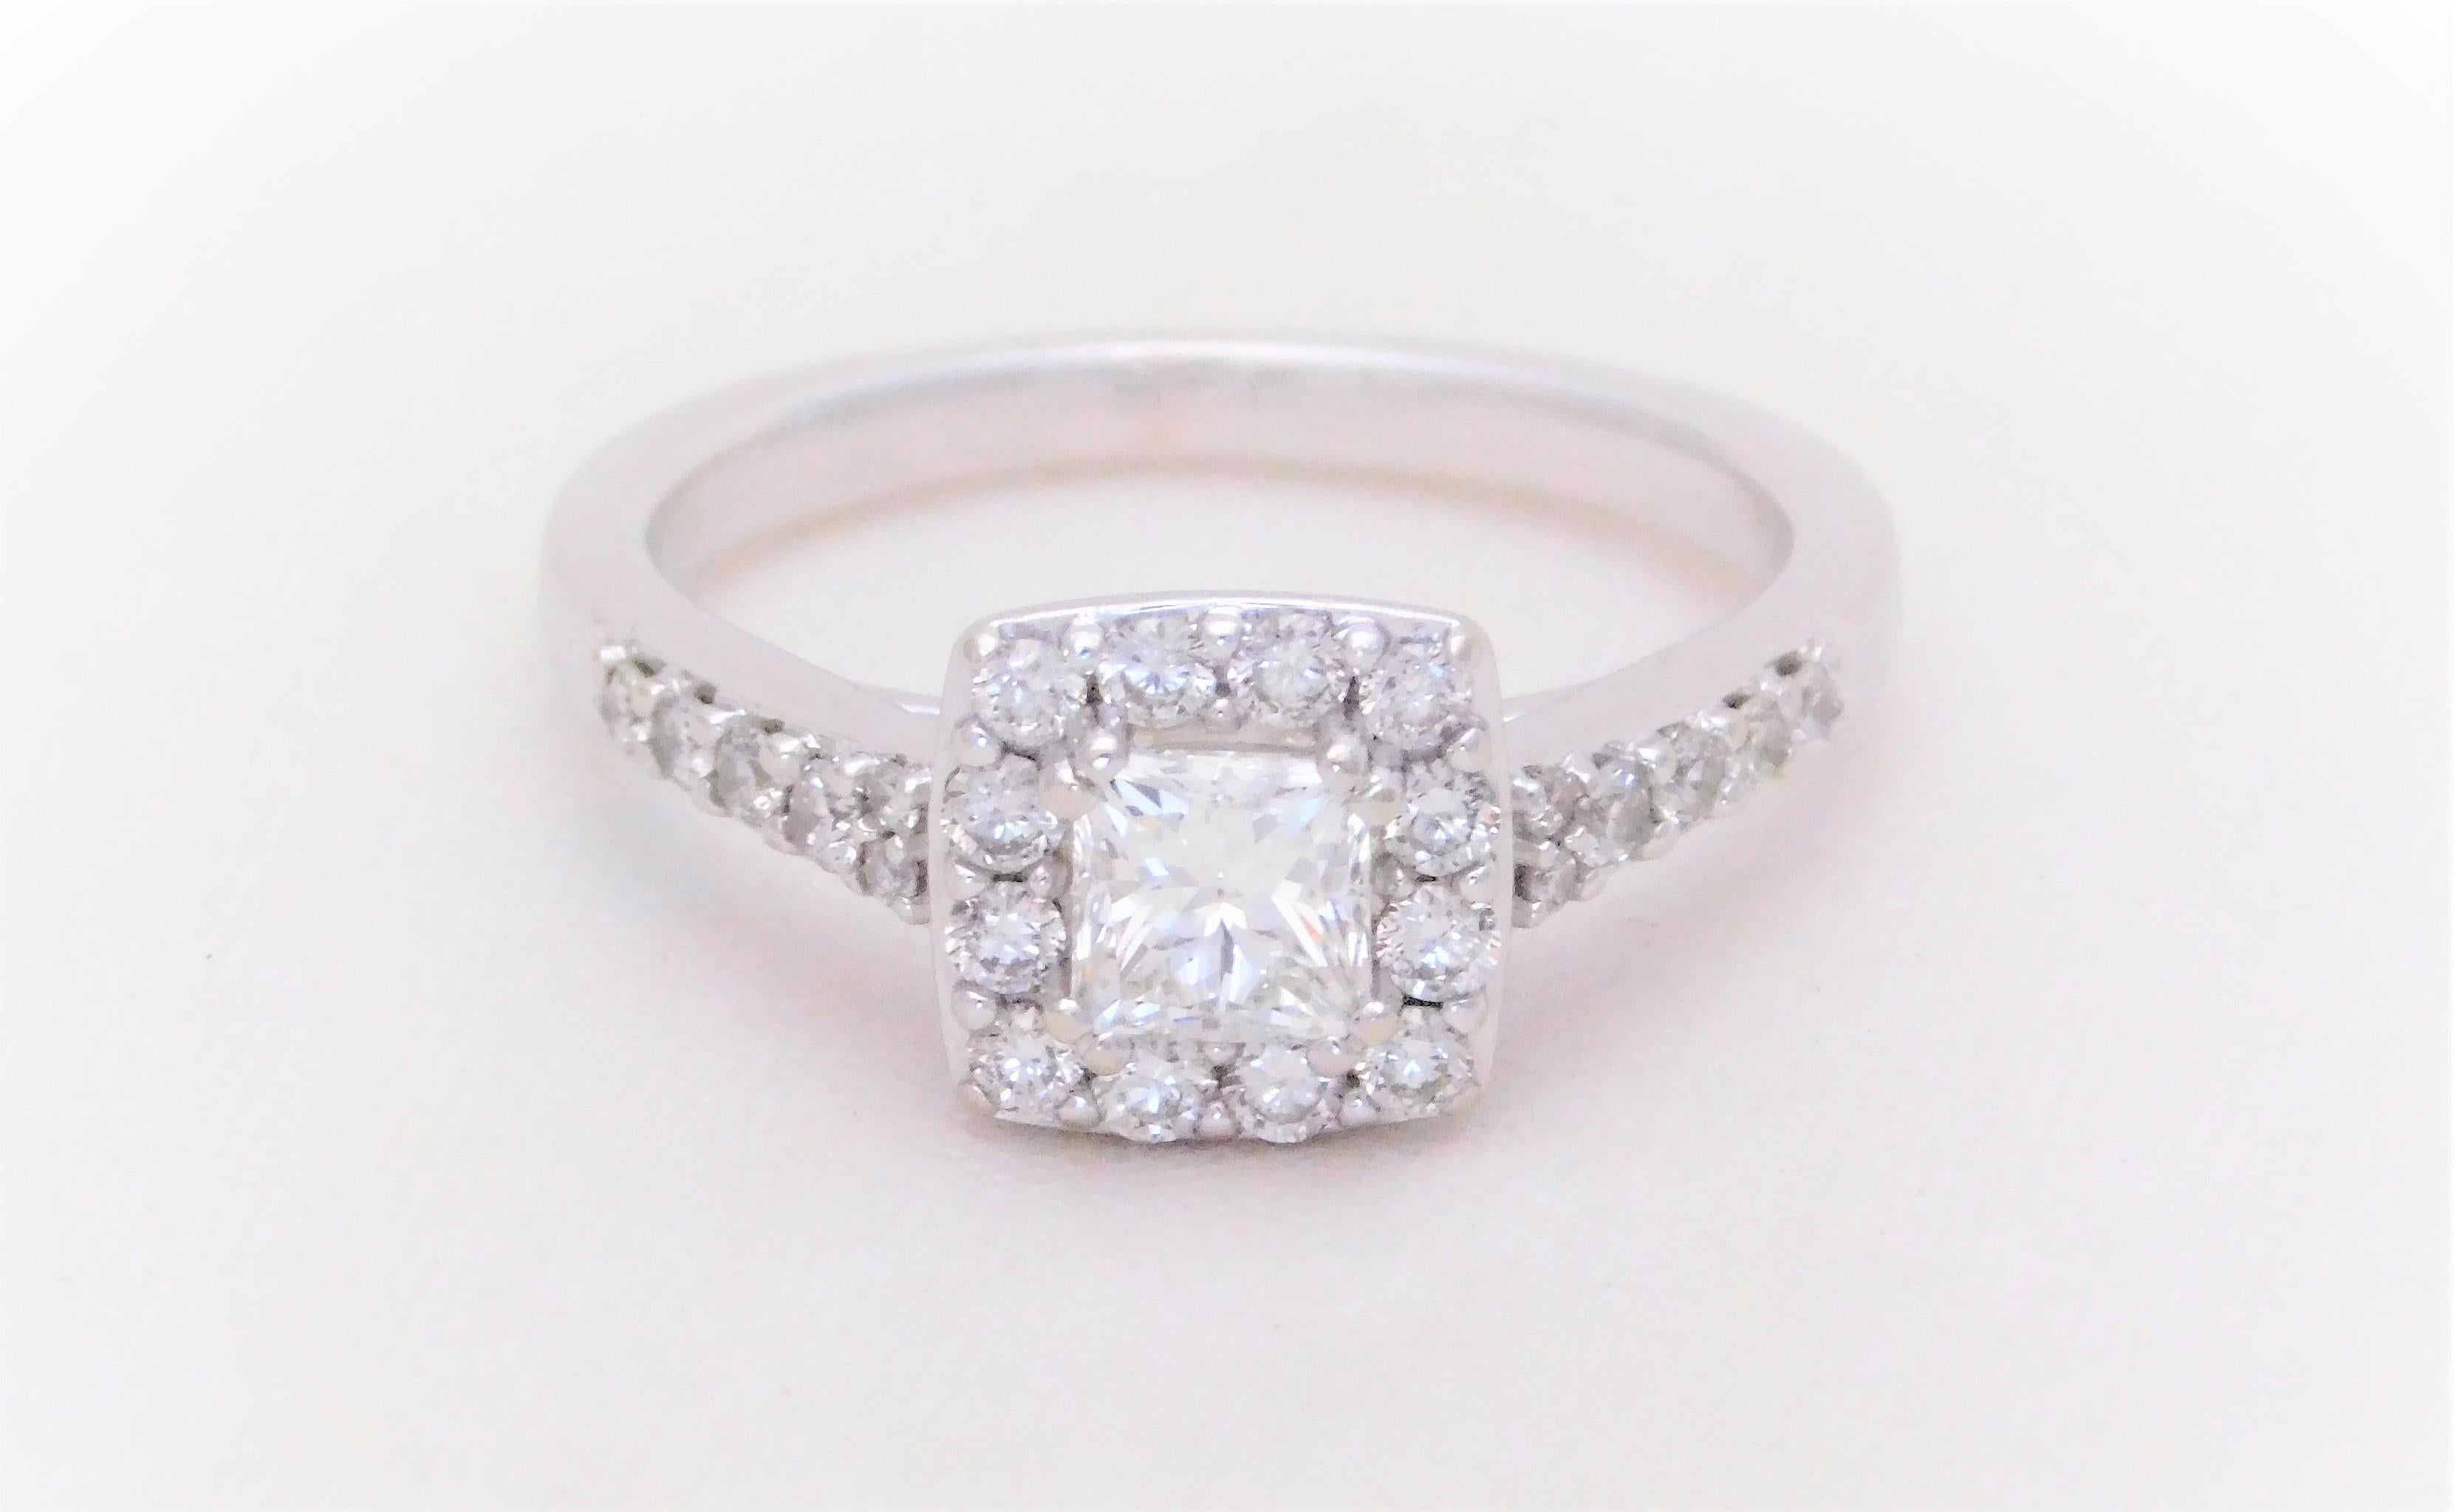 Bright and sparkling!  This charming halo-style engagement ring has been masterfully crafted in solid 14k white gold.  It has been jeweled with a 0.46ct natural princess-cut diamond as its dazzling center stone.  This very high-quality diamond has